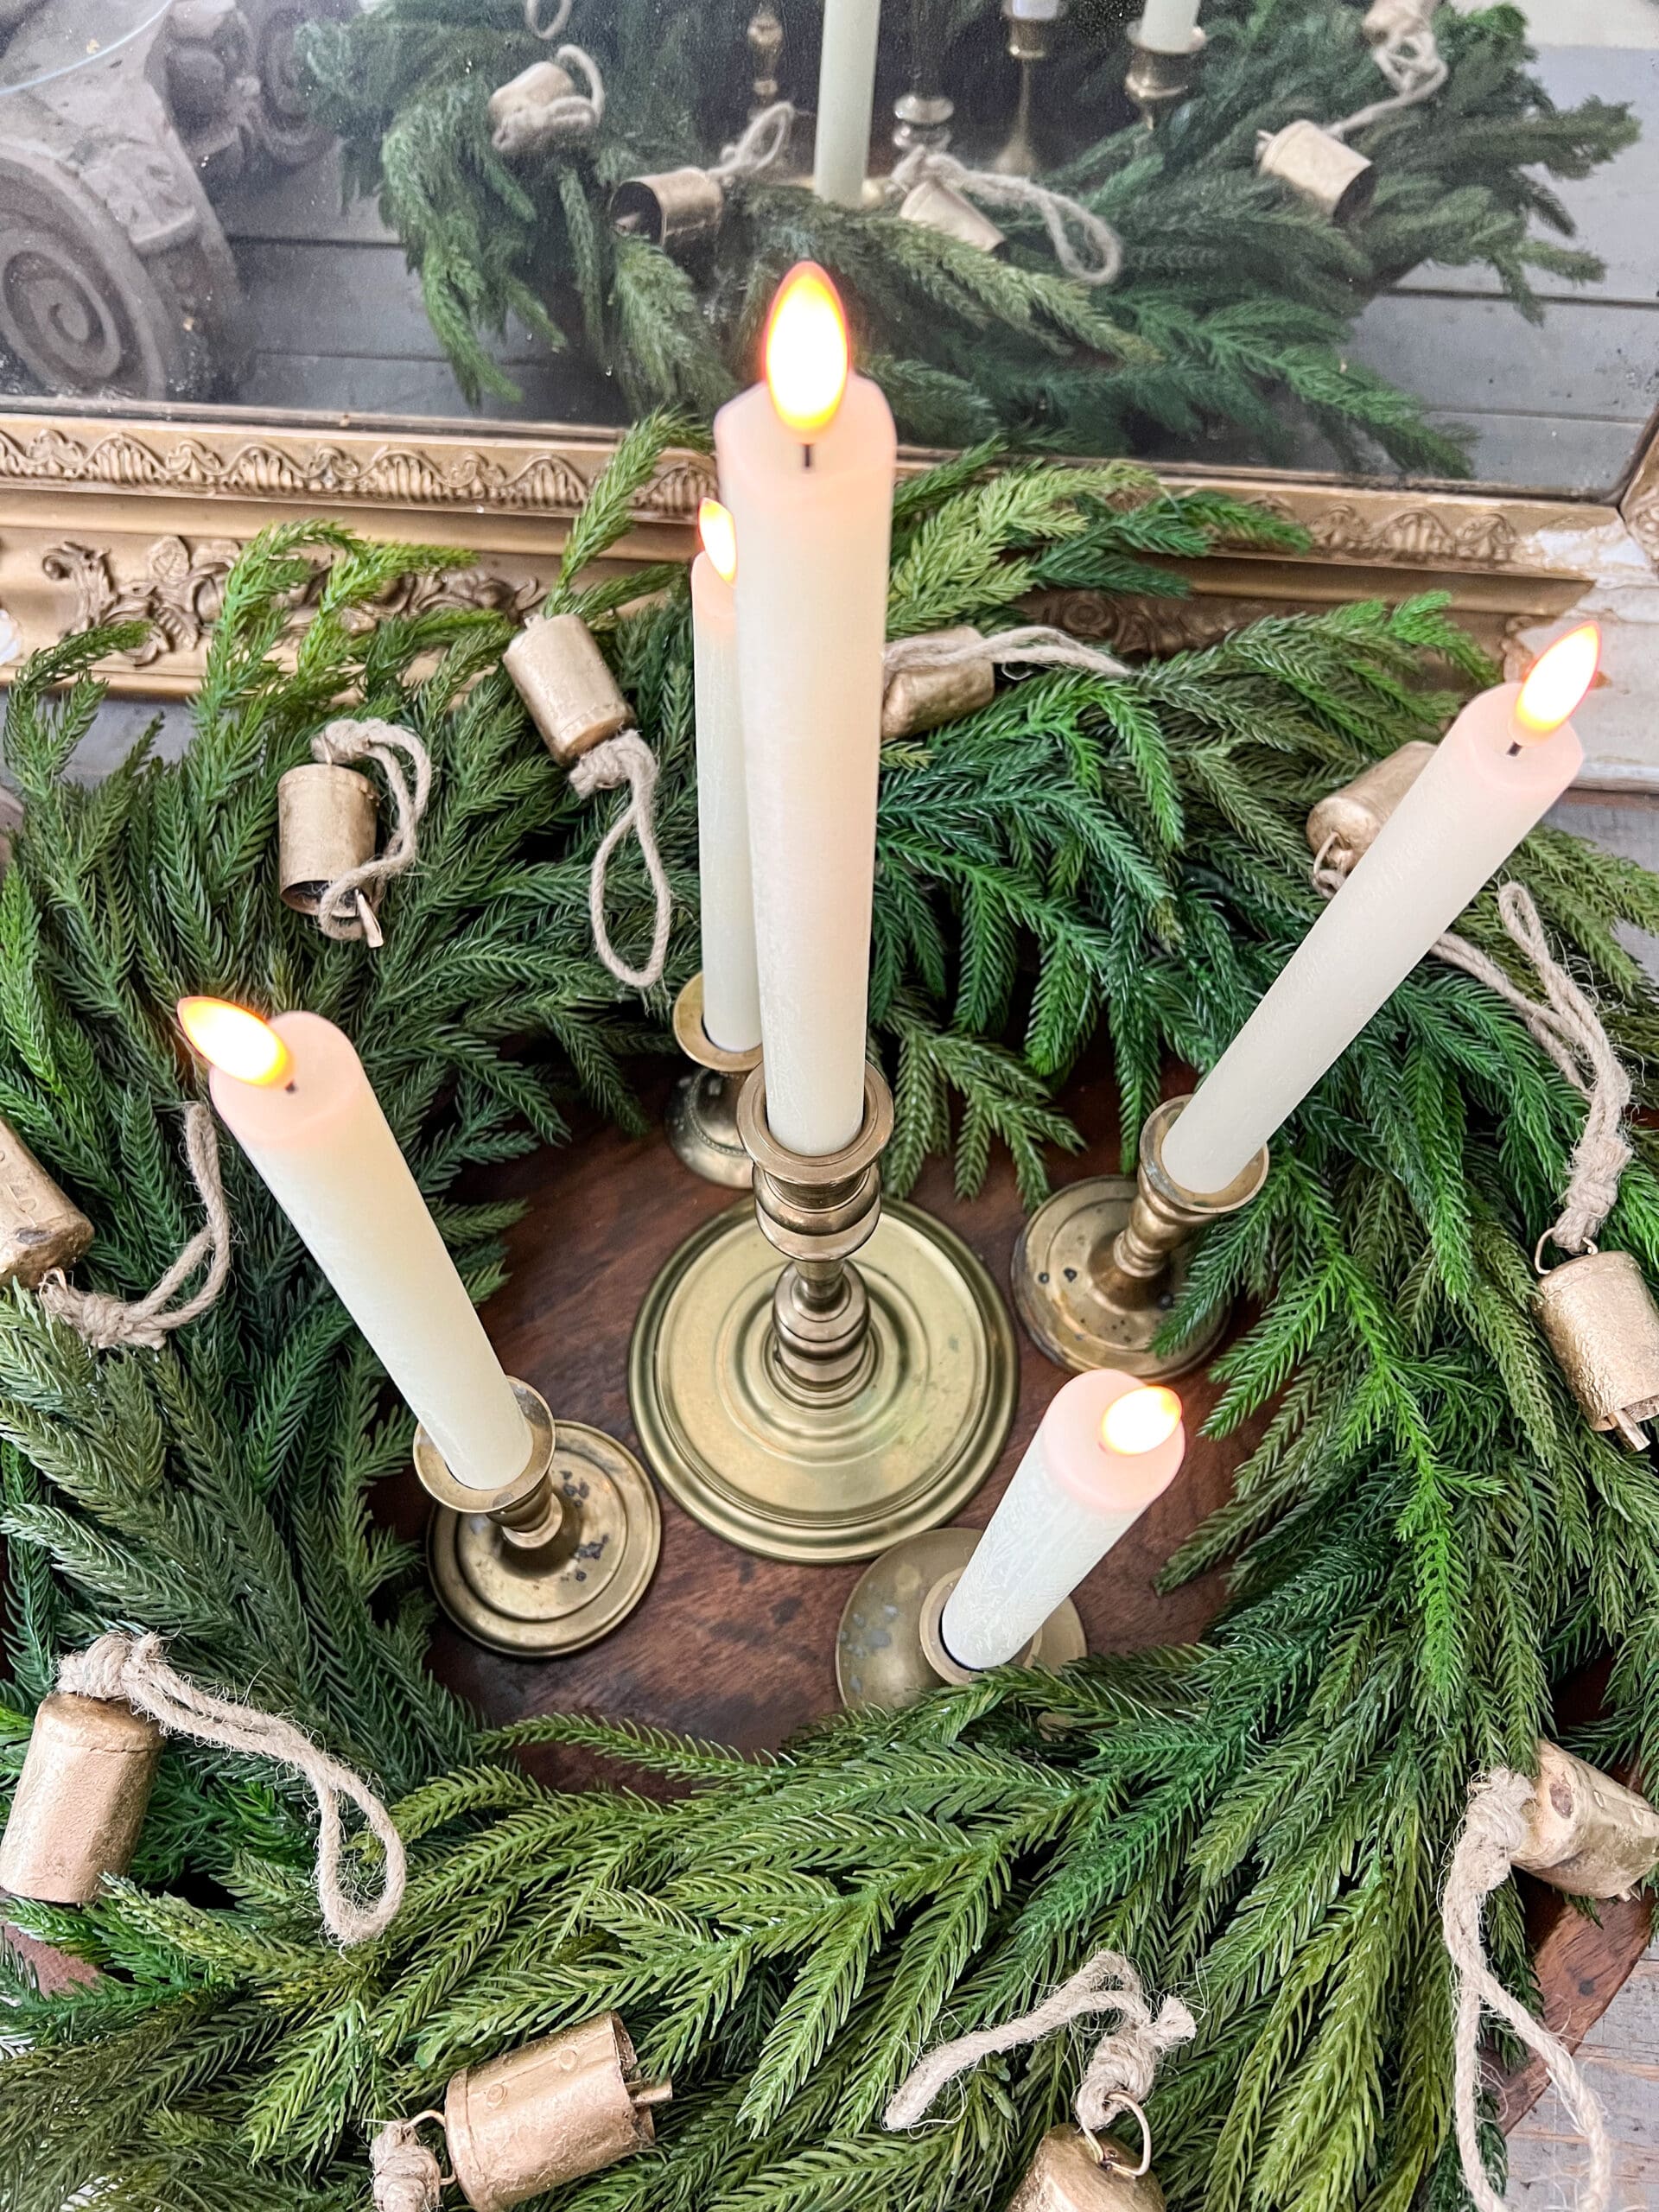 center candle of the advent wreath on a golden candlestick at the bottom of the vessel